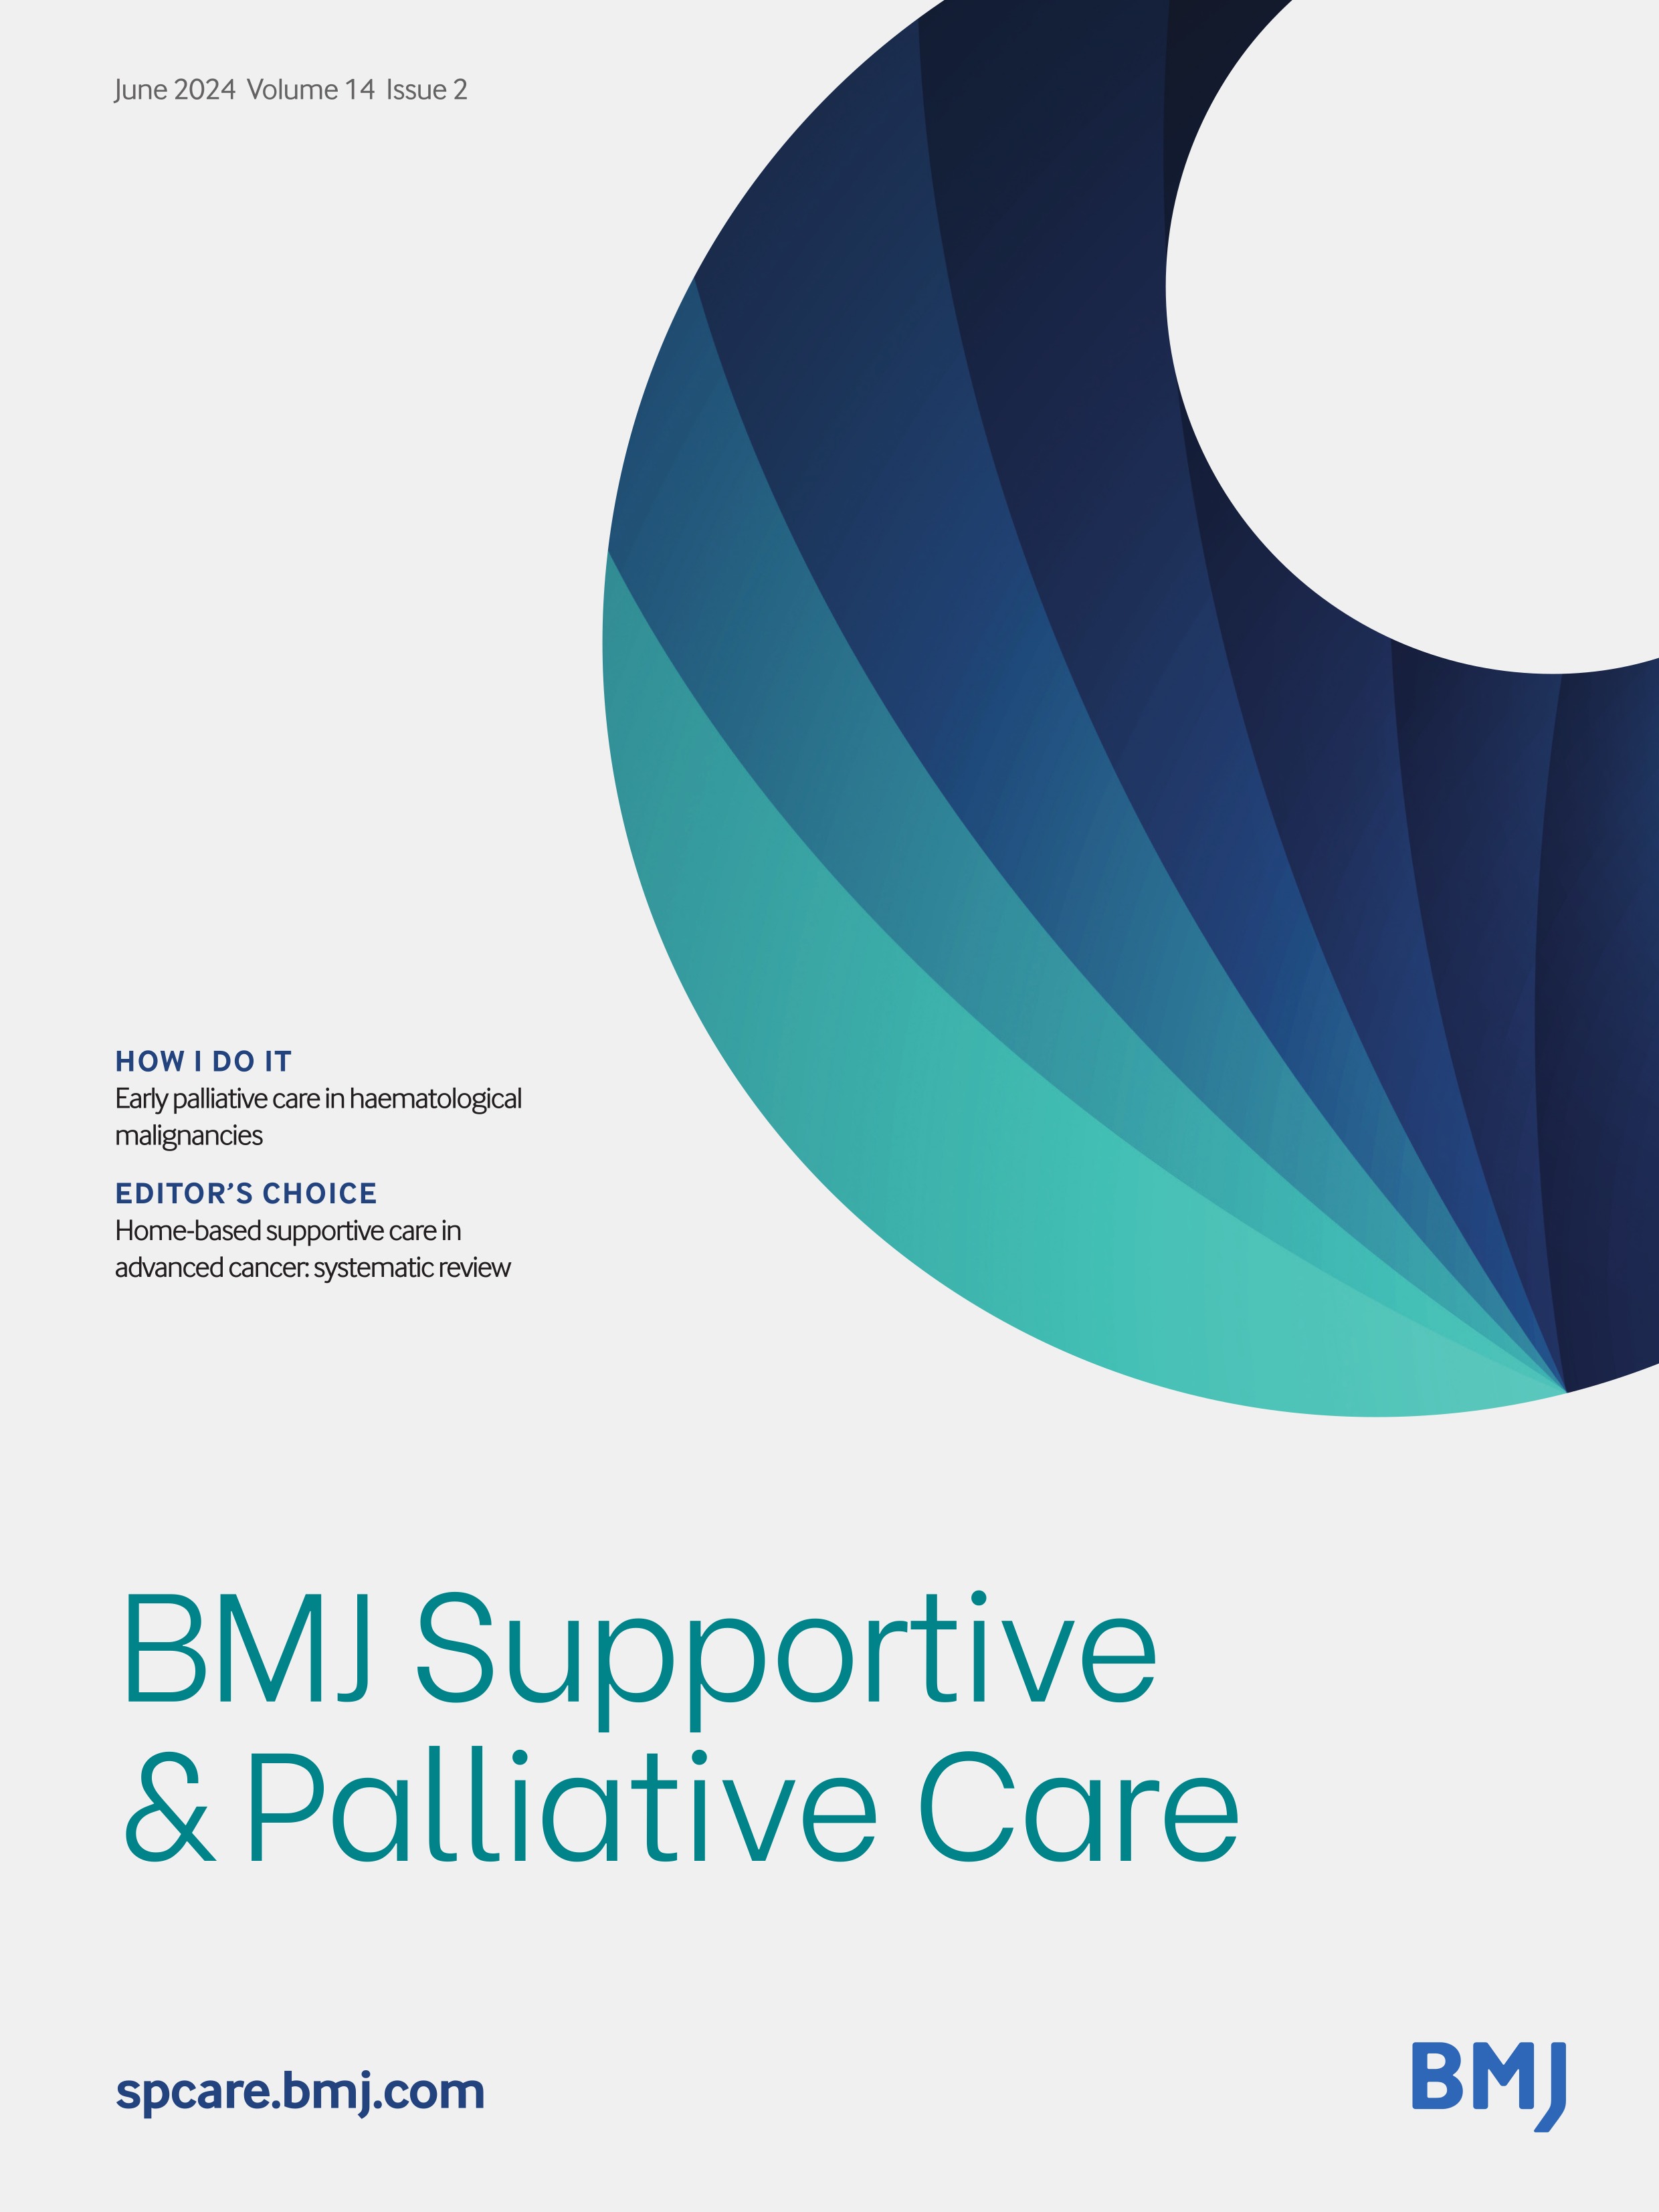 Home-based supportive care in advanced cancer: systematic review